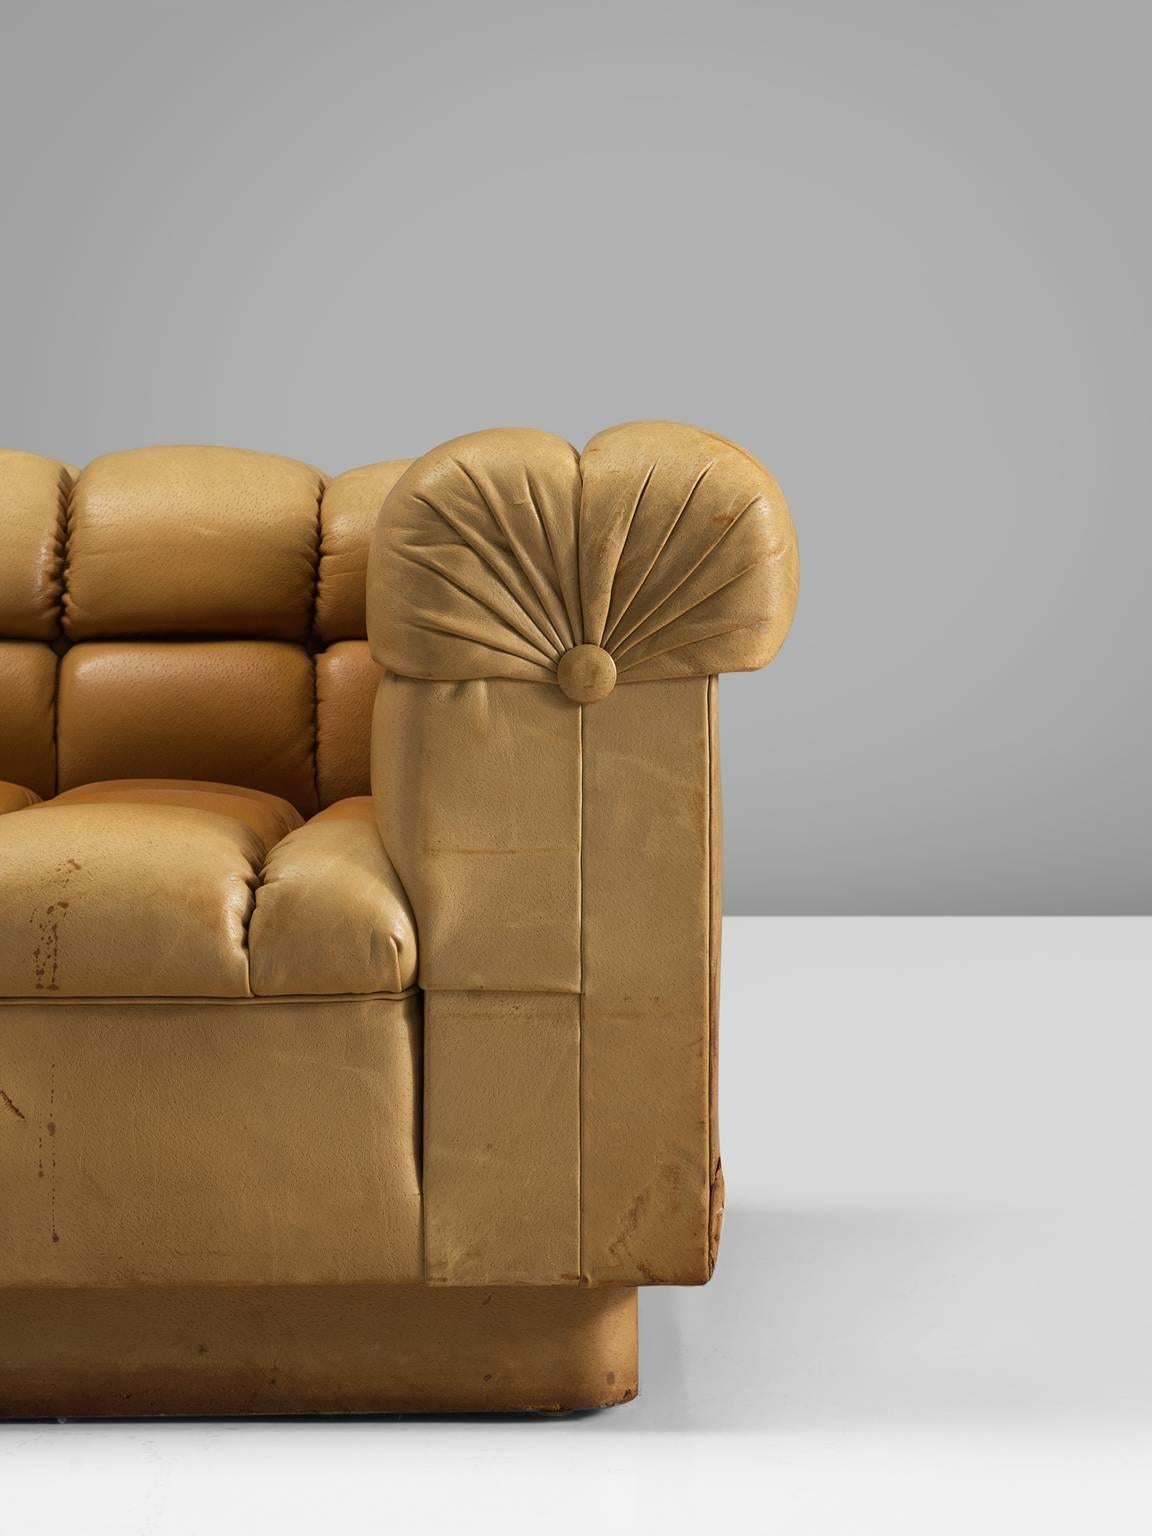 Mid-20th Century Edward Wormley 'Party' Sofa in Cognac Leather